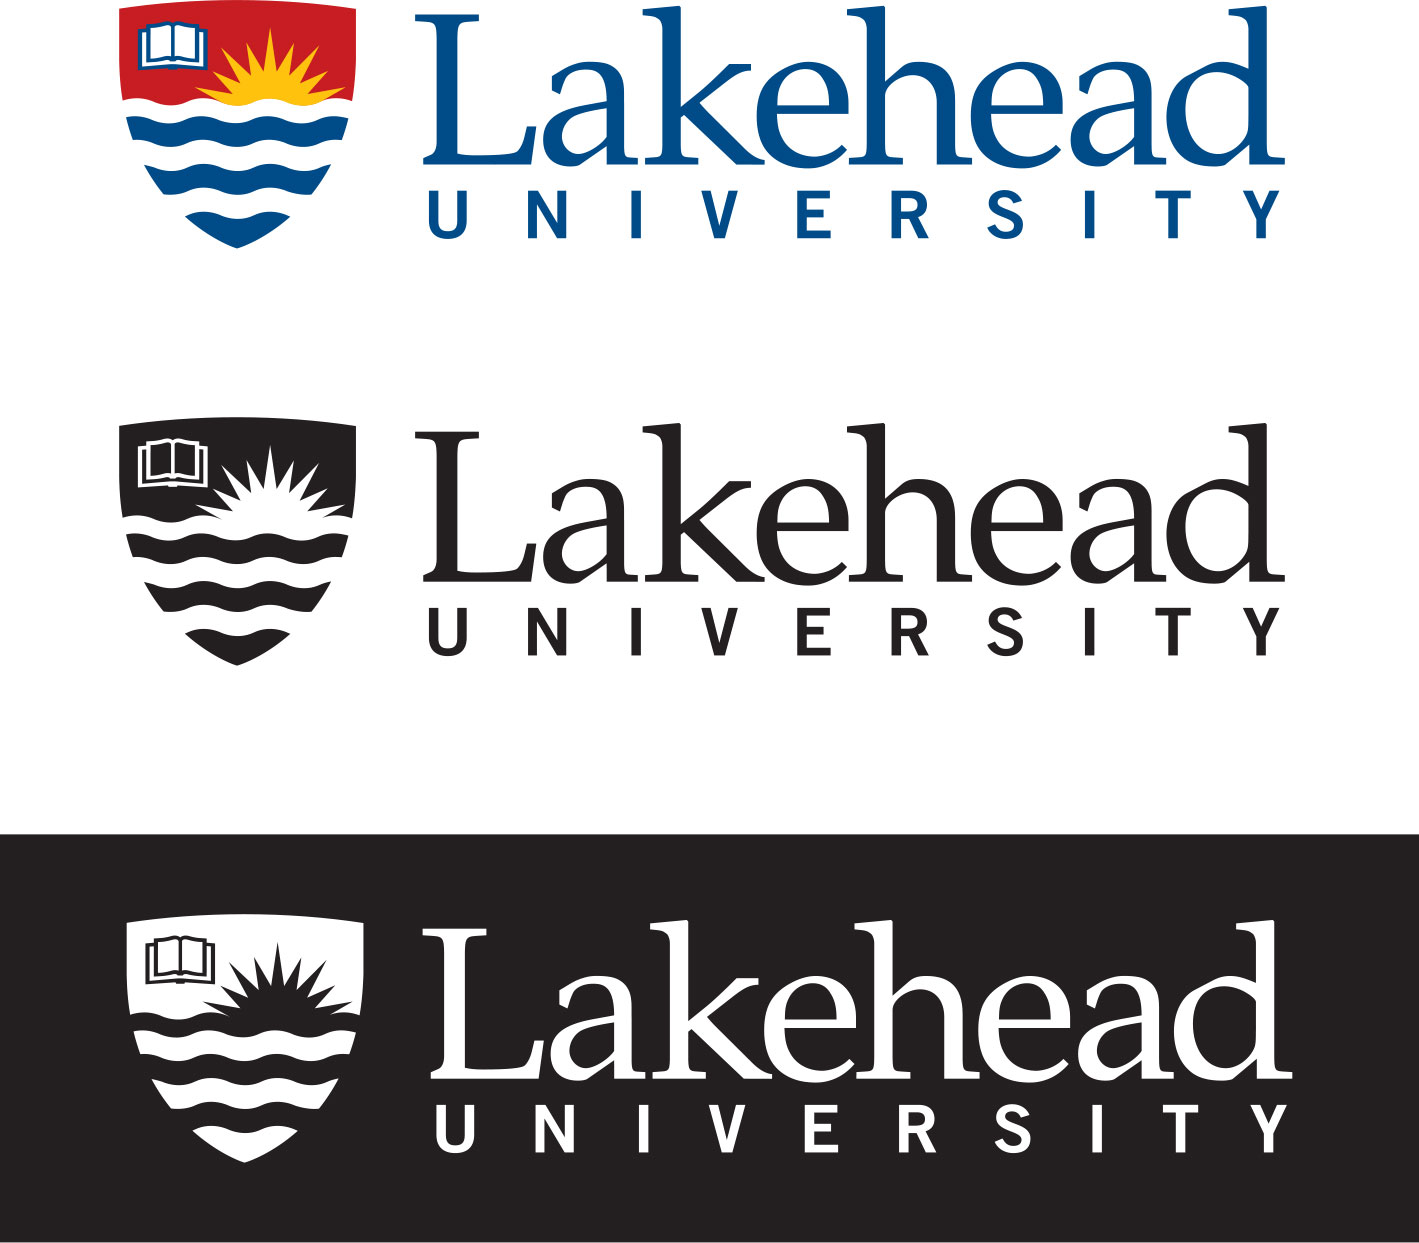 Lakehead University logo in full colour black and white and on a full colour background